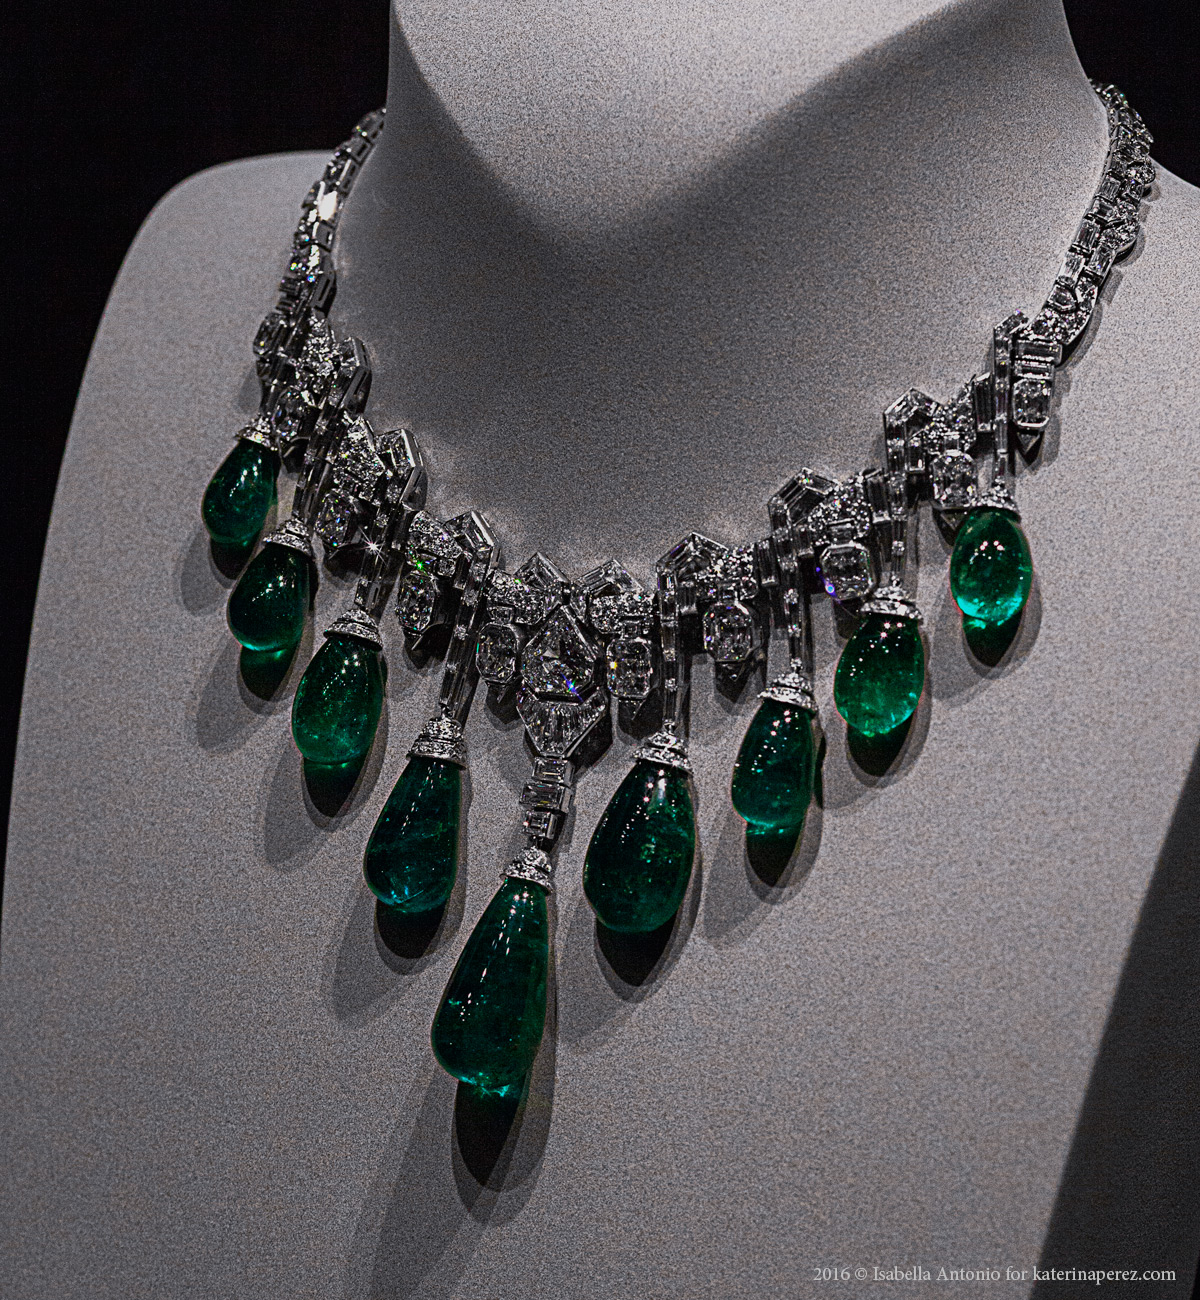 Collaret, 1929. Platinum, emeralds, diamonds. In the former collection of Princess Faiza of Egypt